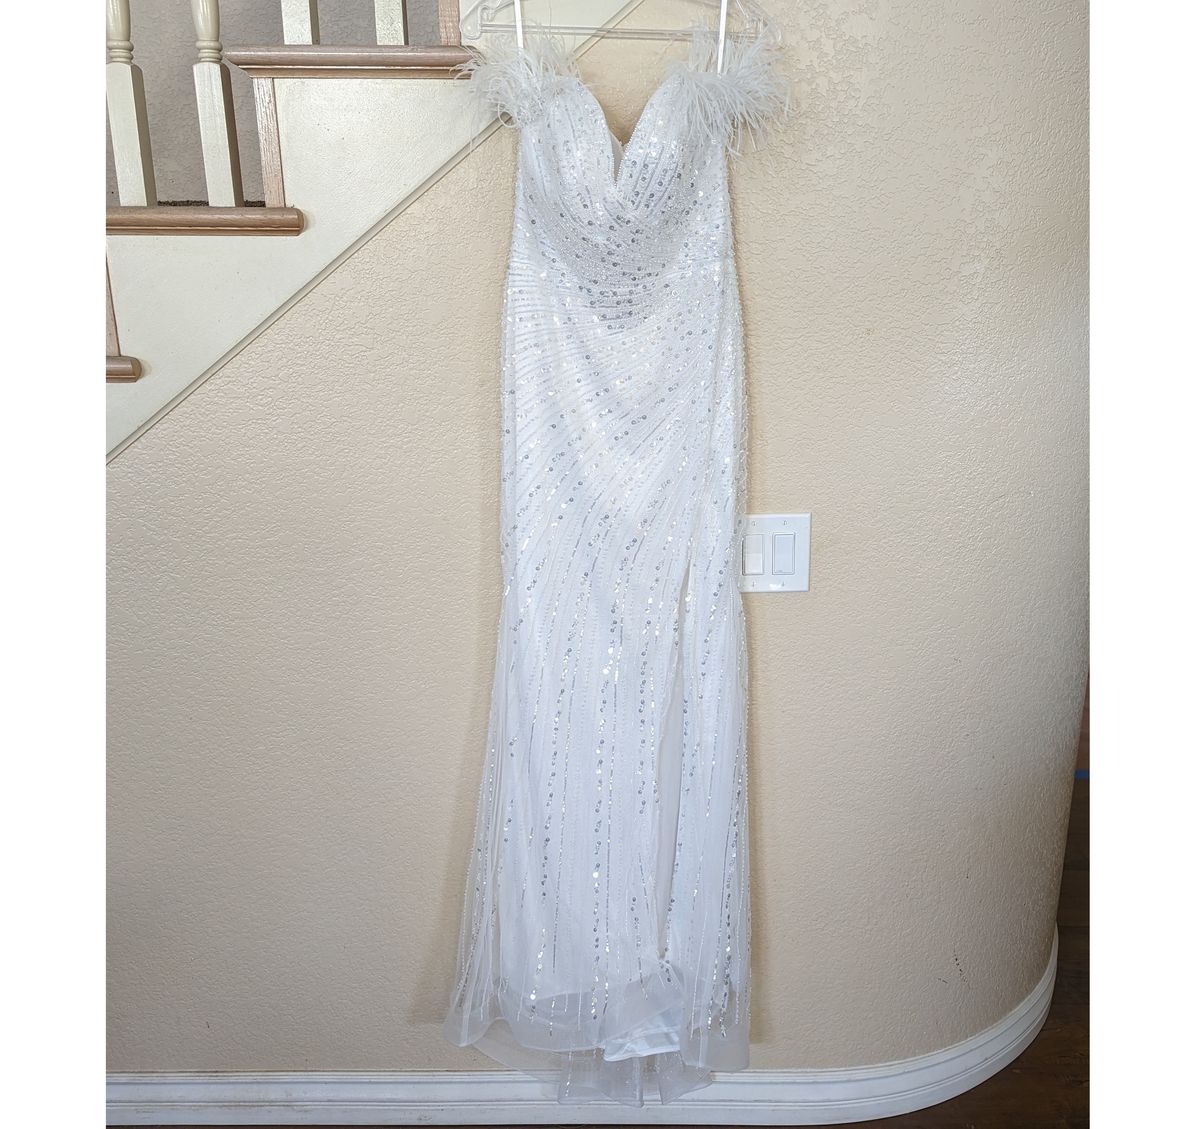 Style Off White Feather & Sequined Off the Shoulder Side Slit Mermaid Wedding Dress Size 10 Wedding Off The Shoulder White Side Slit Dress on Queenly